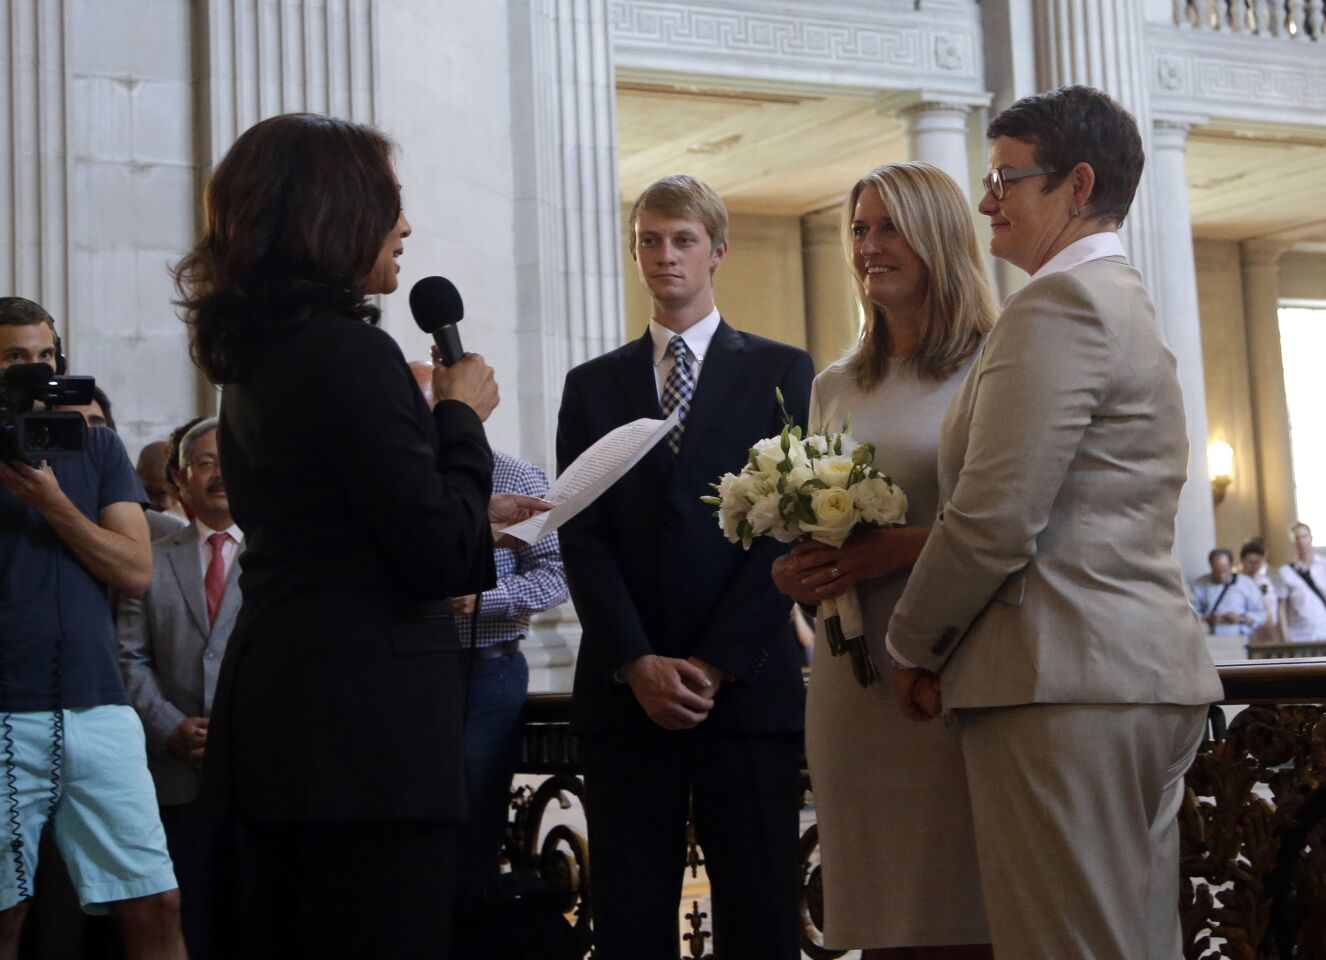 June 28, 2013: Sandy Stier and Kris Perry exchange wedding vows in front of California Atty. Gen. Kamala Harris.